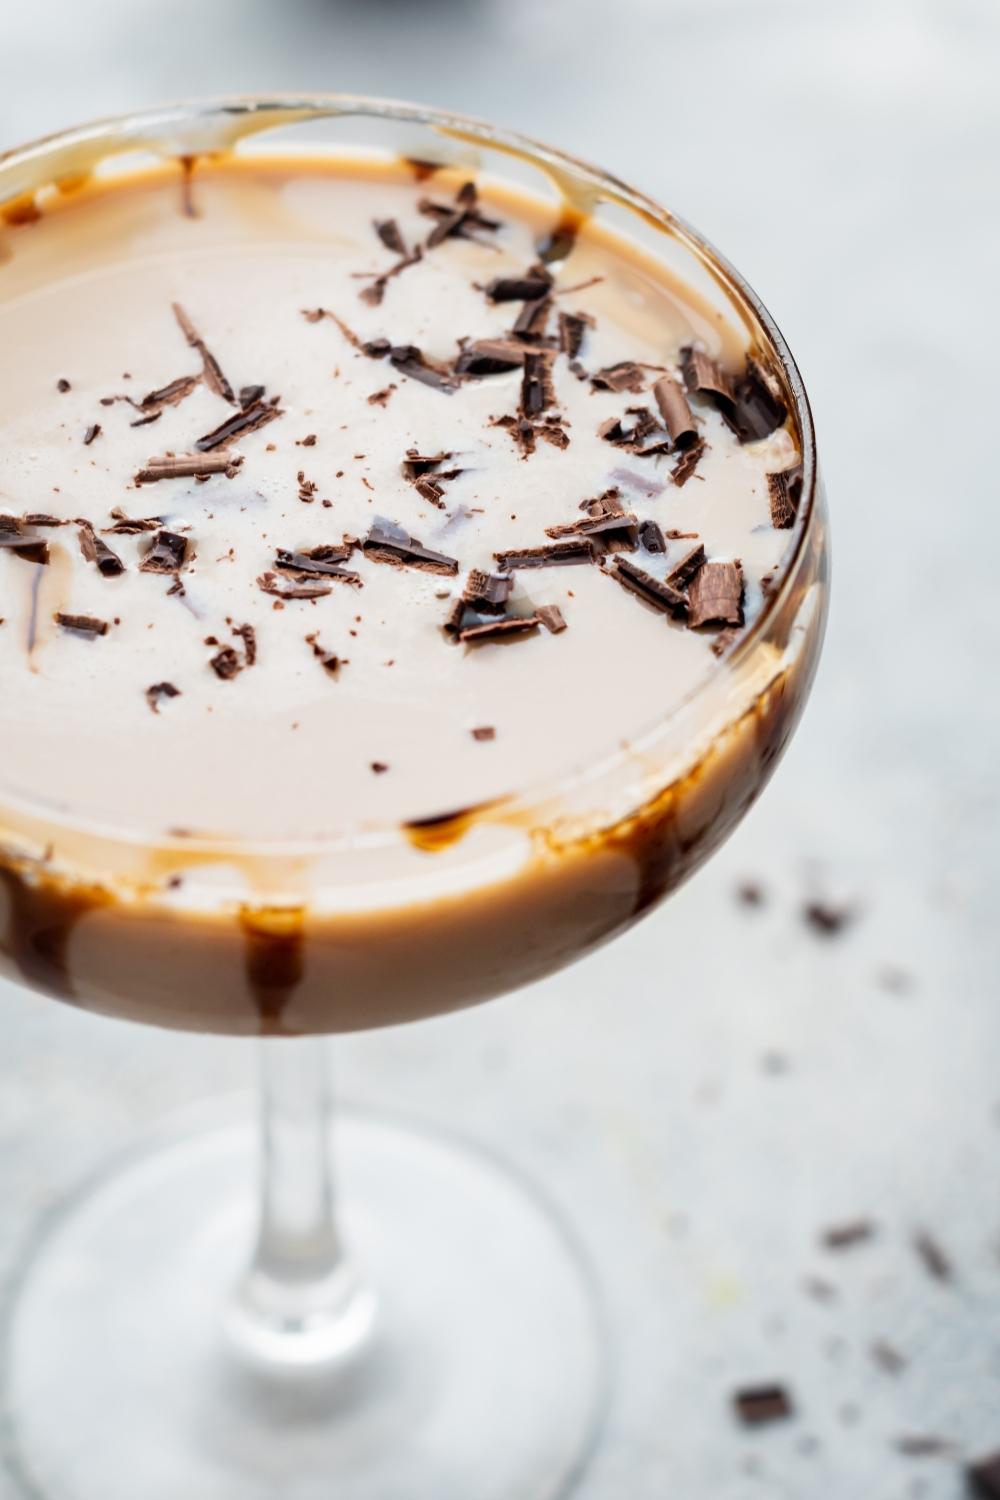 A close-up overhead view of a mudslide cocktail in a cocktail stemmed glass. It is garnished with shaved chocolate and there is drizzled chocolate on the inside of the glass.